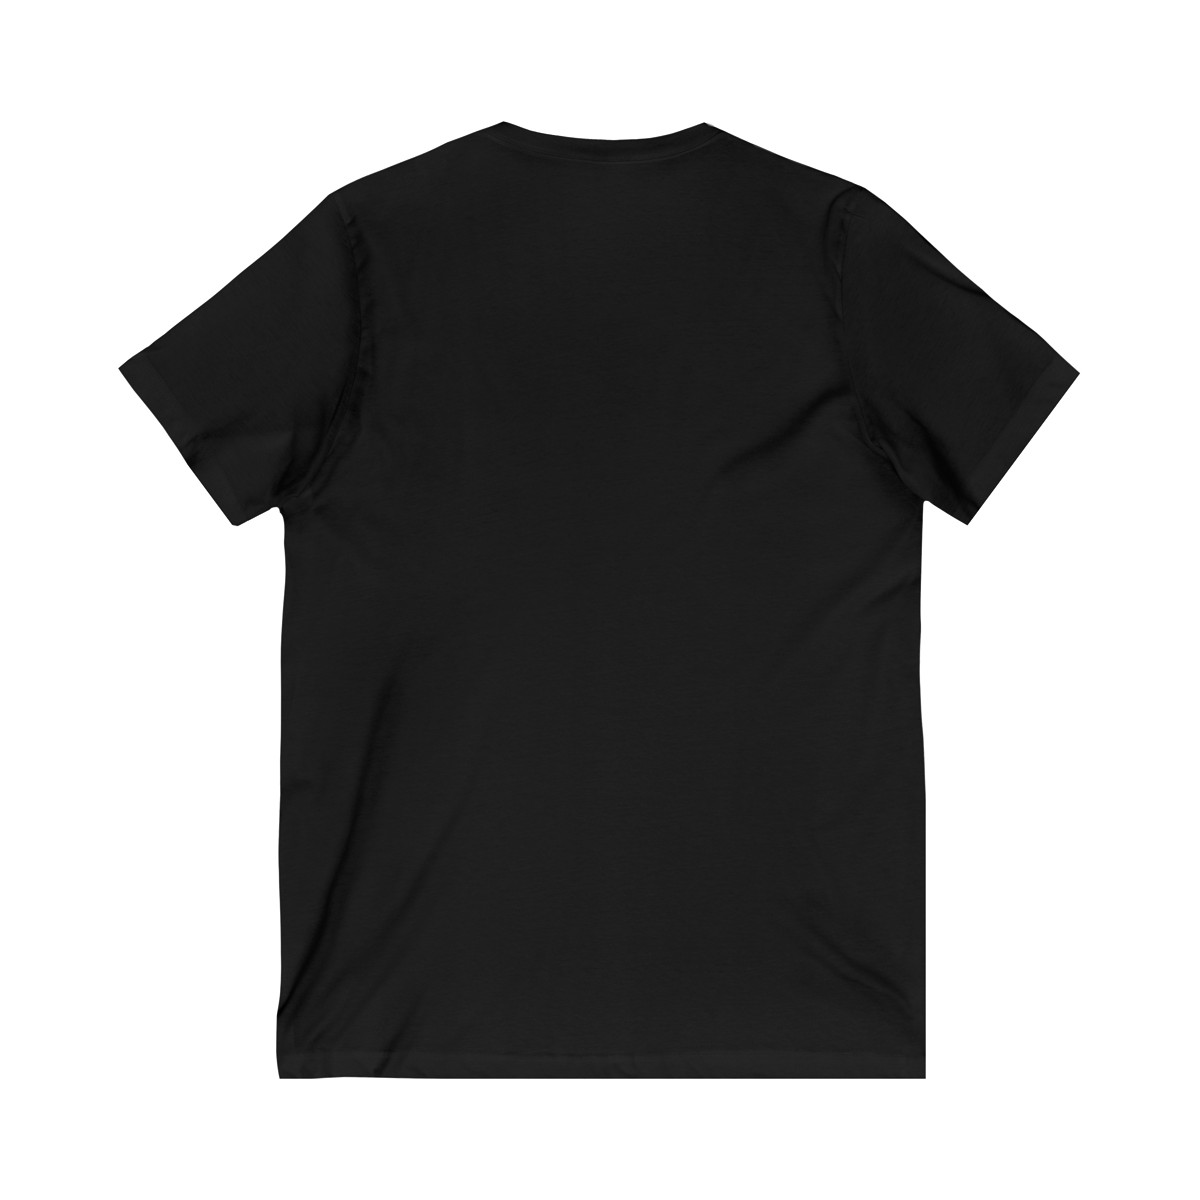 SPILL - Red Unisex Jersey Short Sleeve V-Neck Tee product thumbnail image